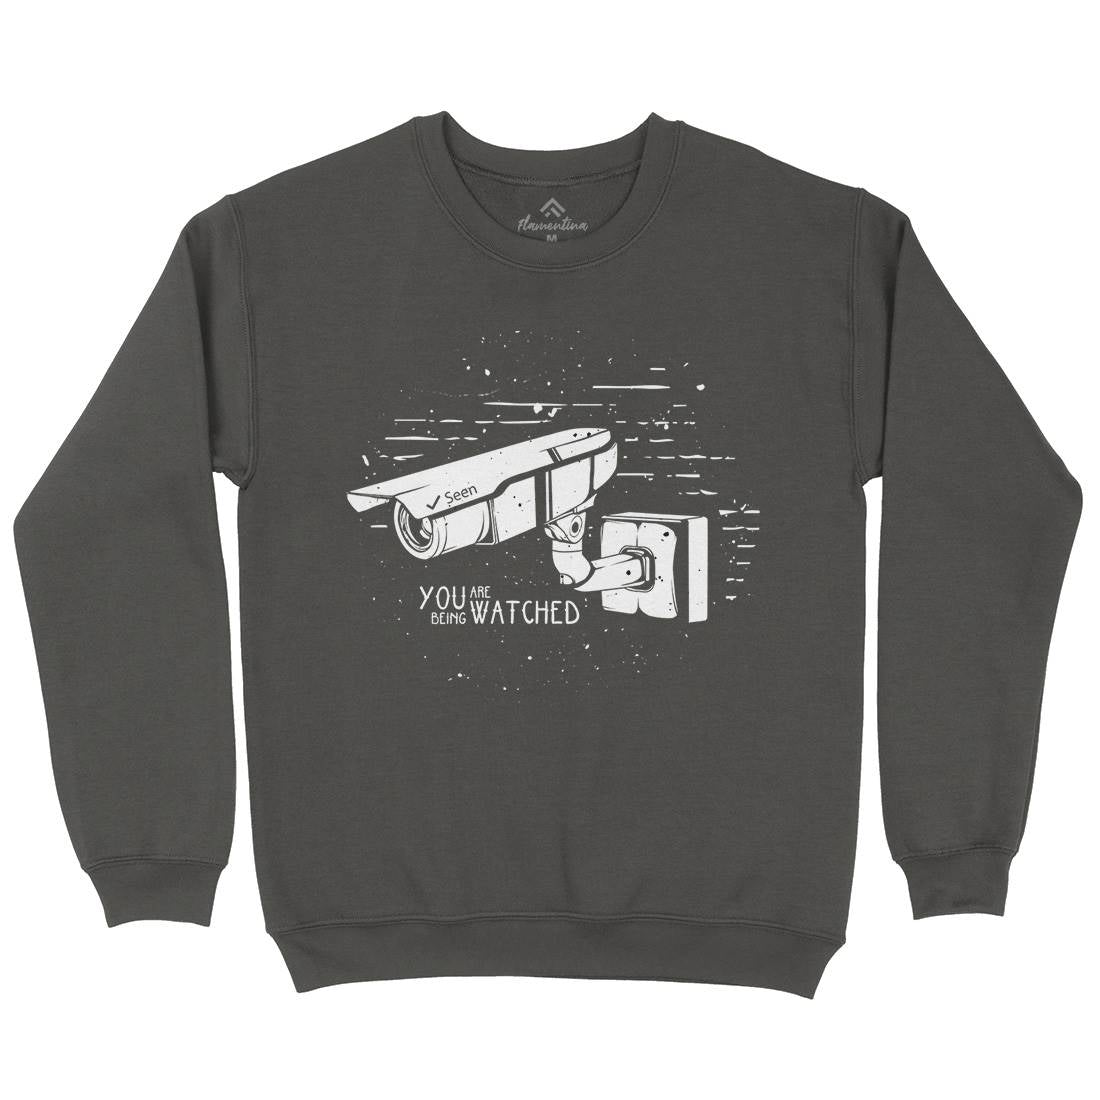 You Are Being Watched Kids Crew Neck Sweatshirt Media D499